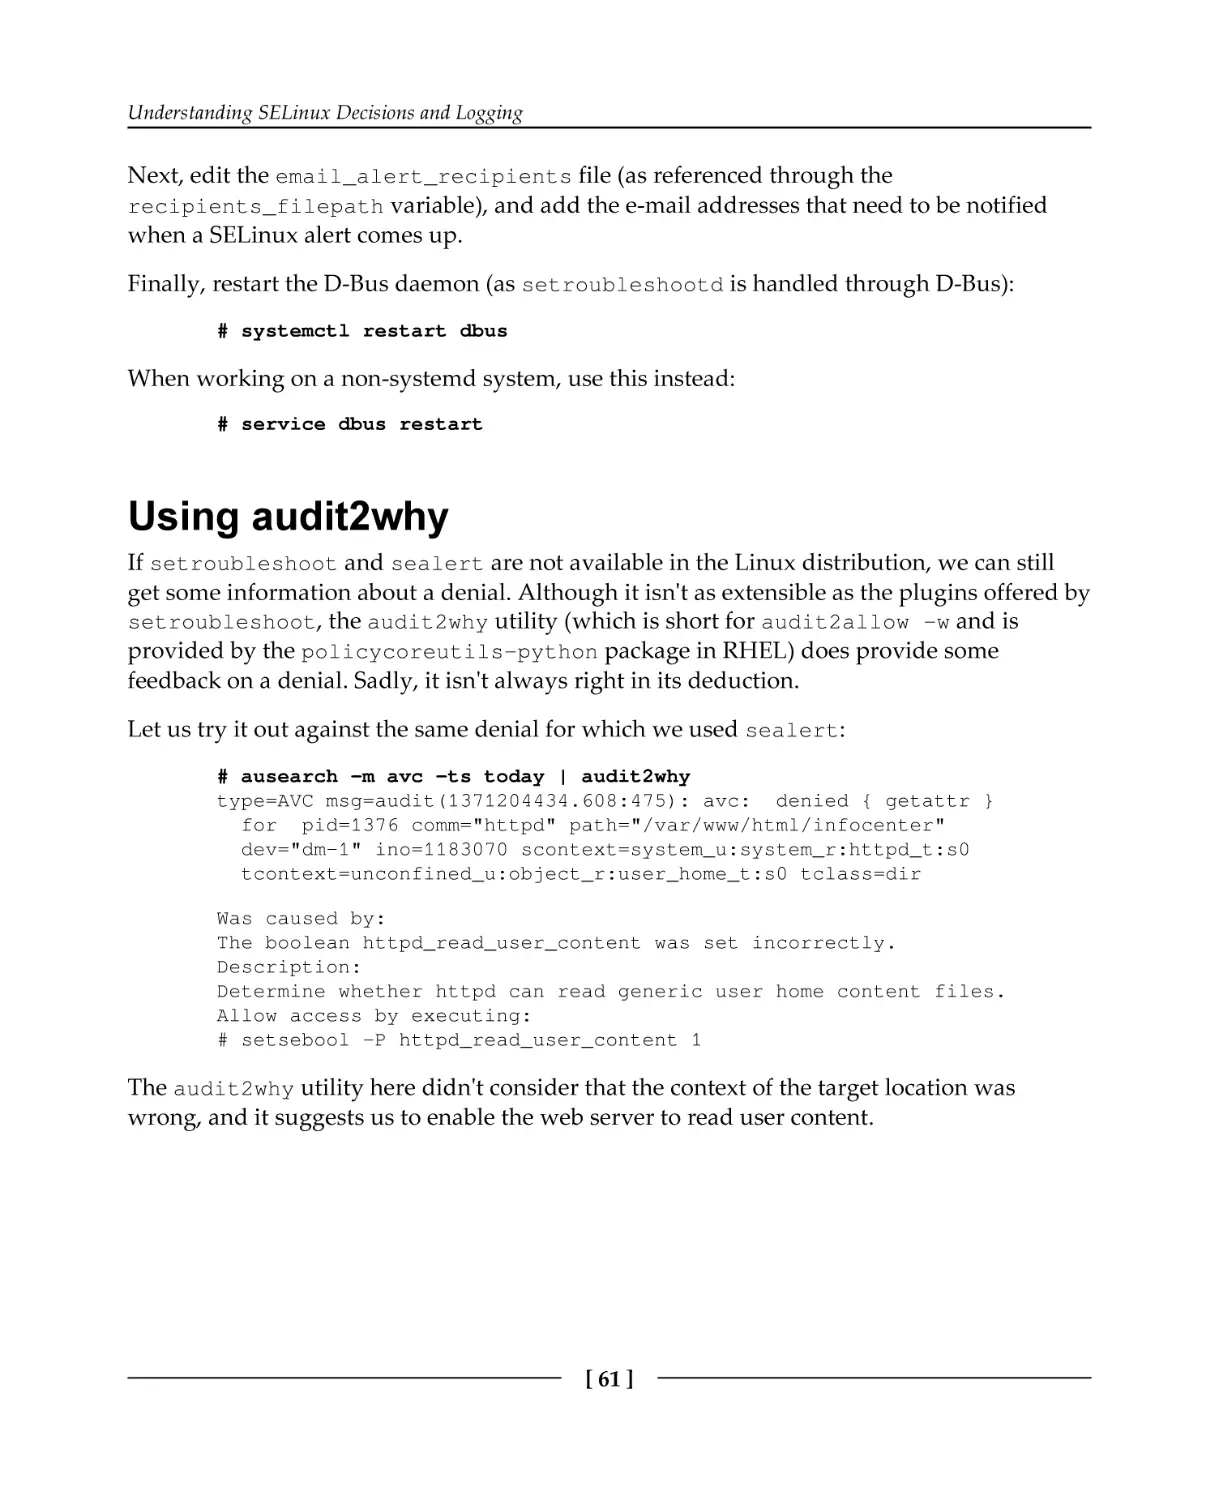 Using audit2why